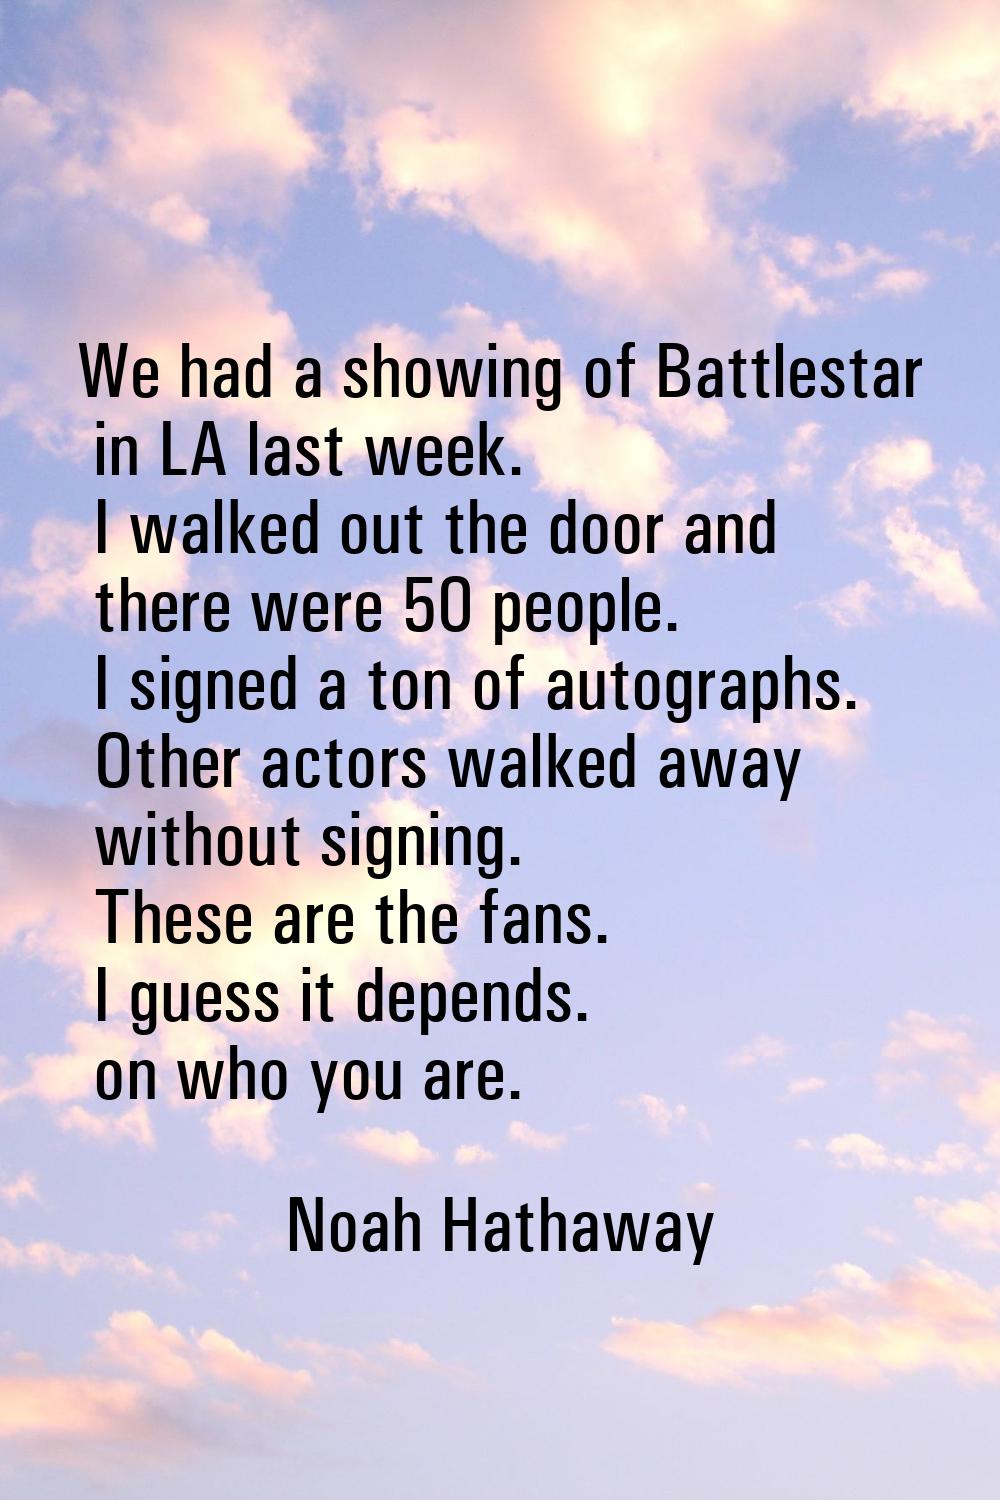 We had a showing of Battlestar in LA last week. I walked out the door and there were 50 people. I s